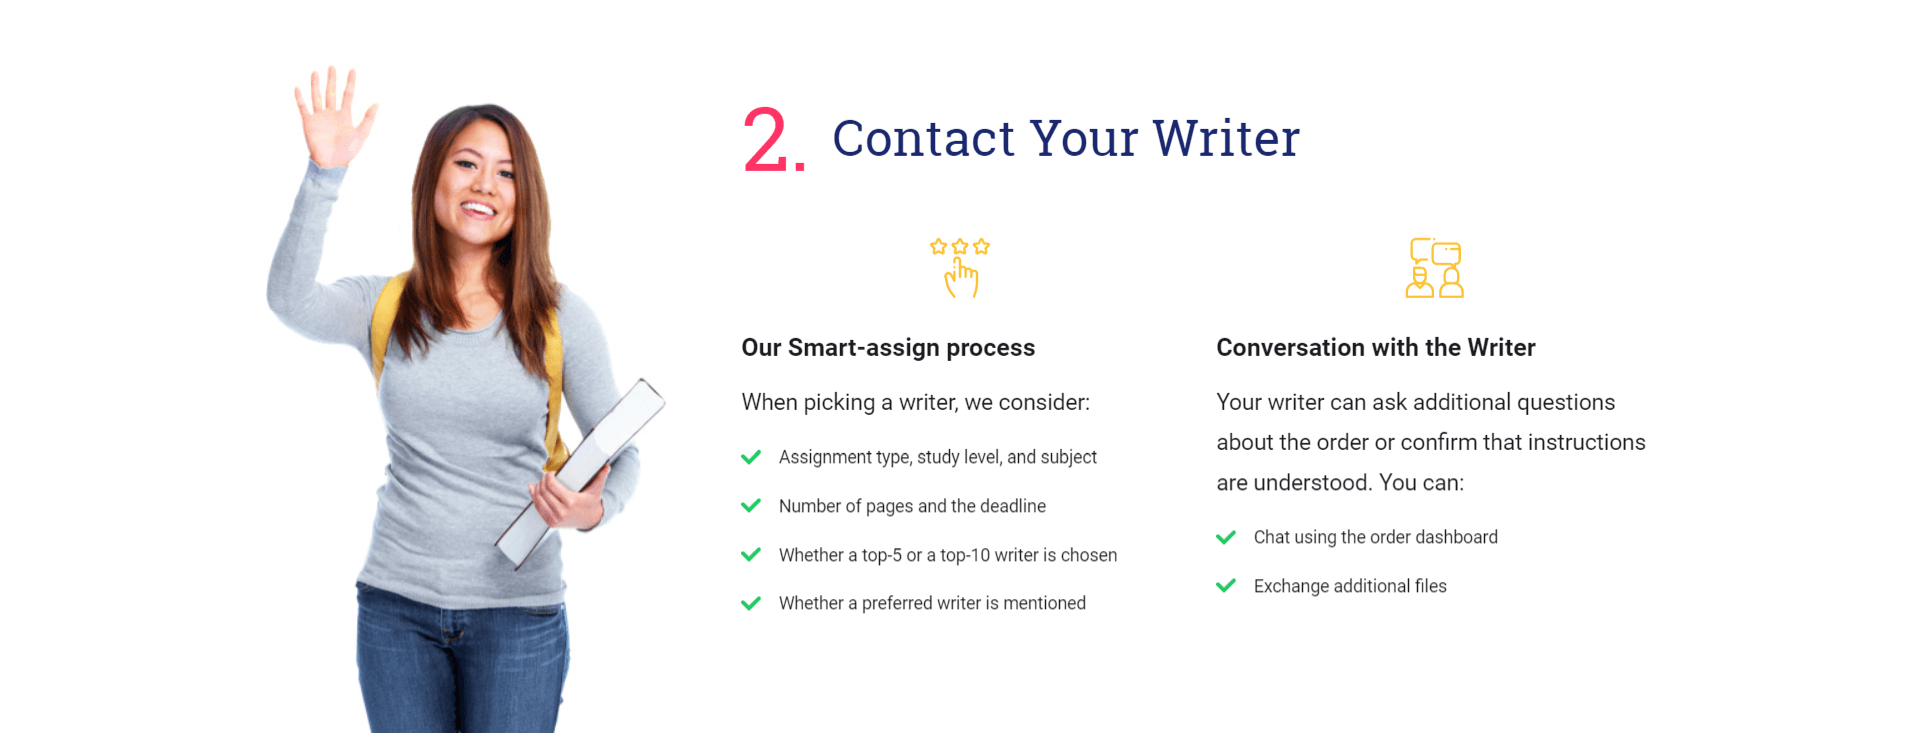 Contact your writer.